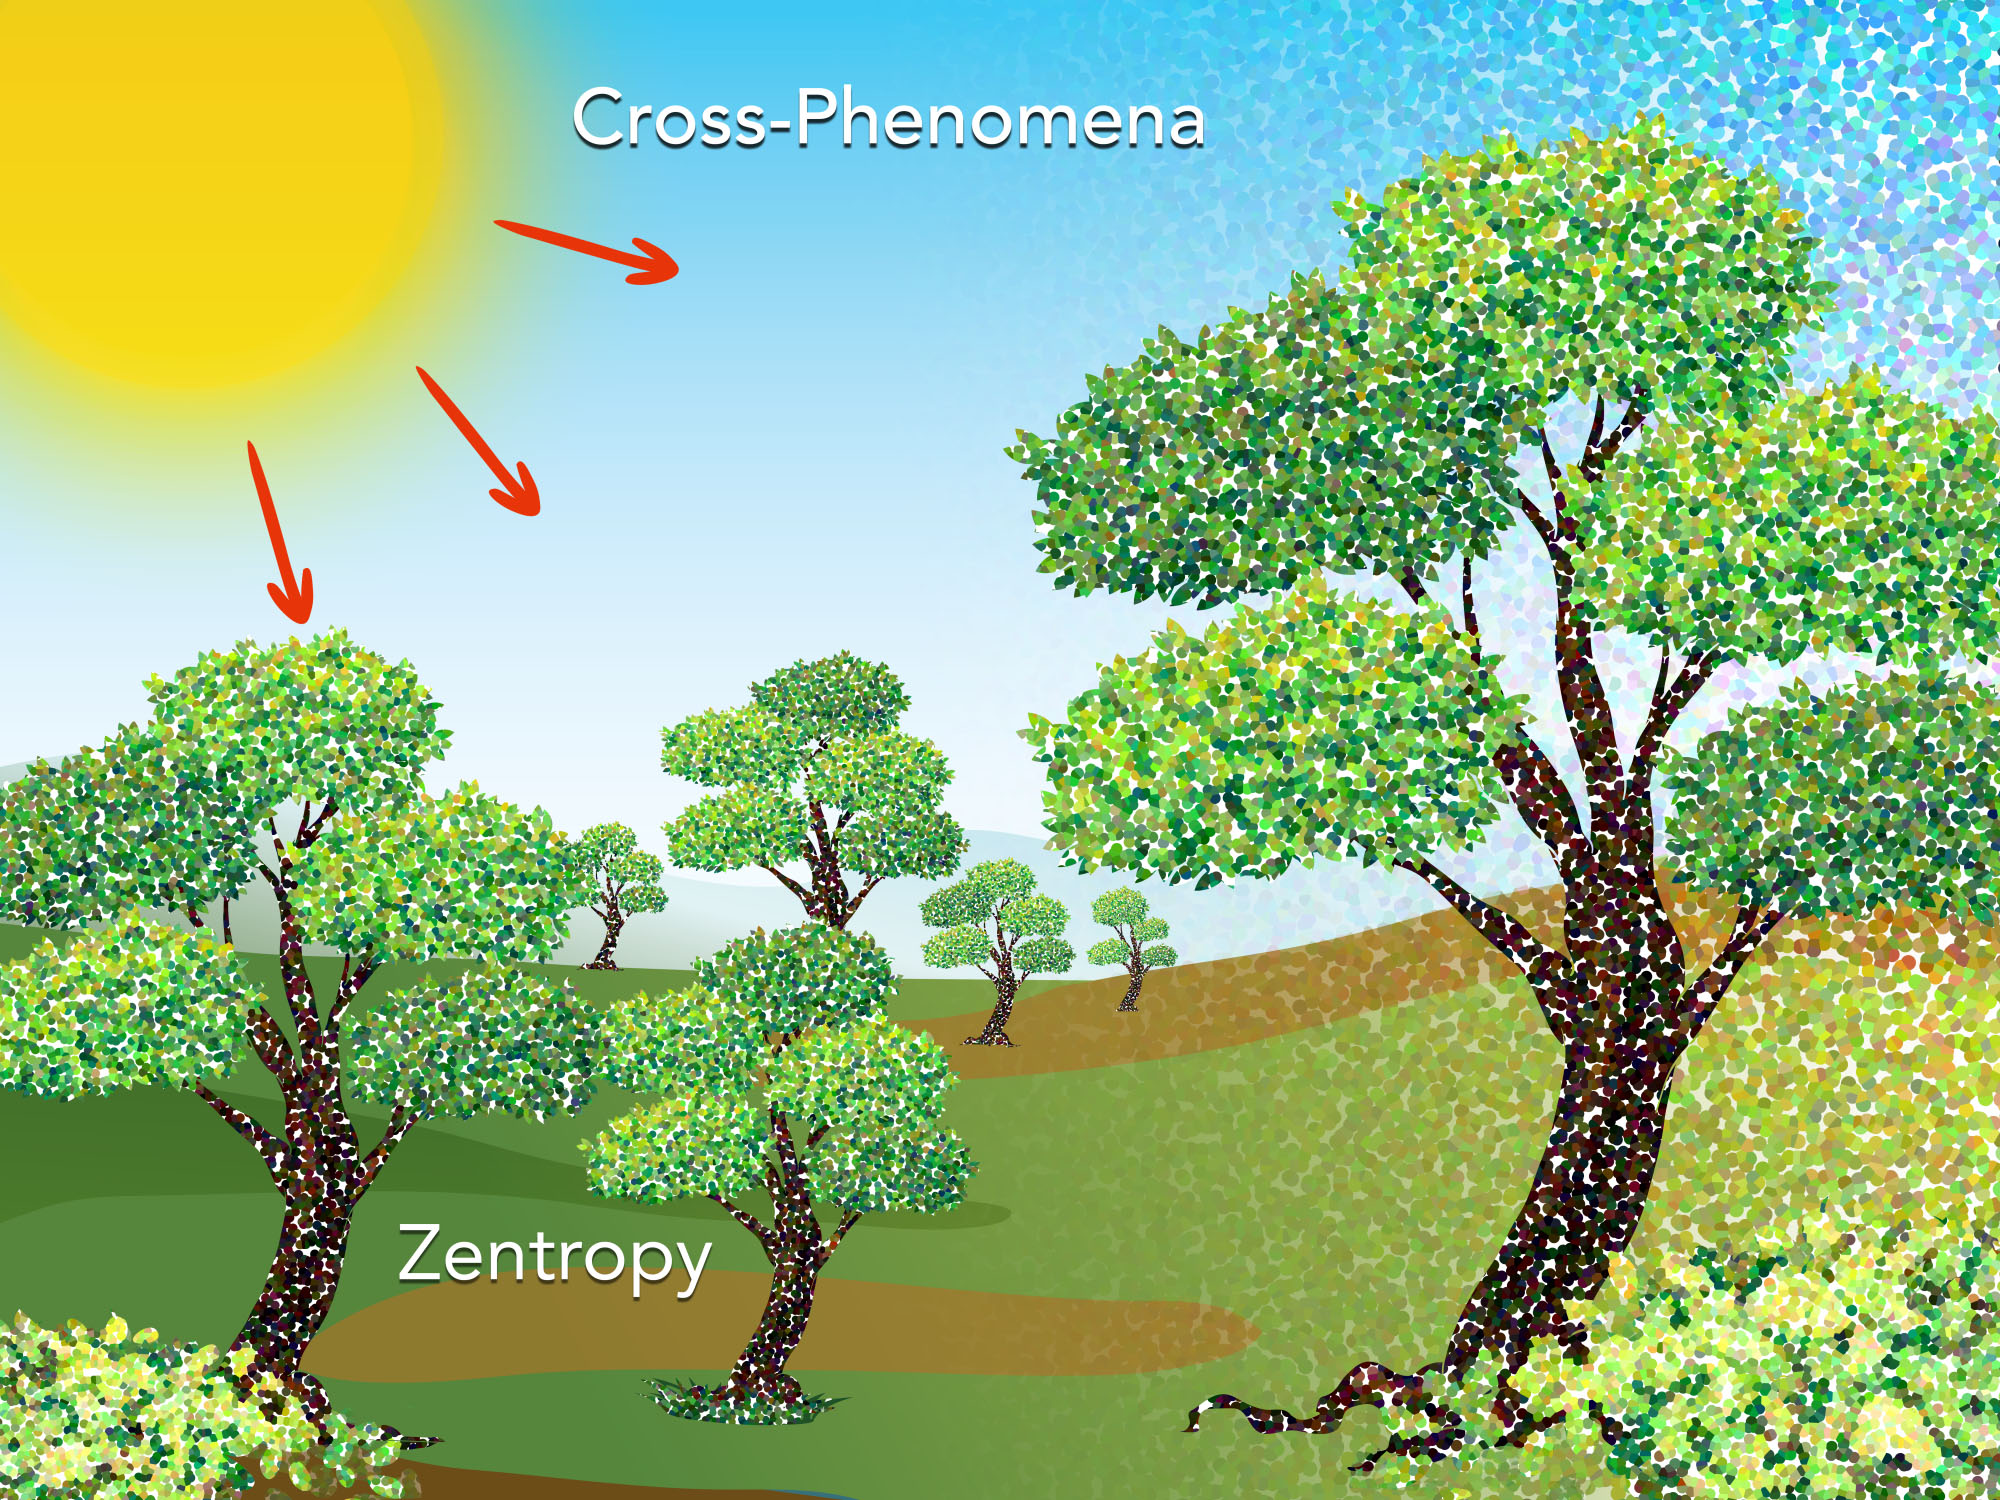 Heat from the Sun results in various examples of cross-phenomena such as evaporation of water and photosynthesis for growth of trees and crops